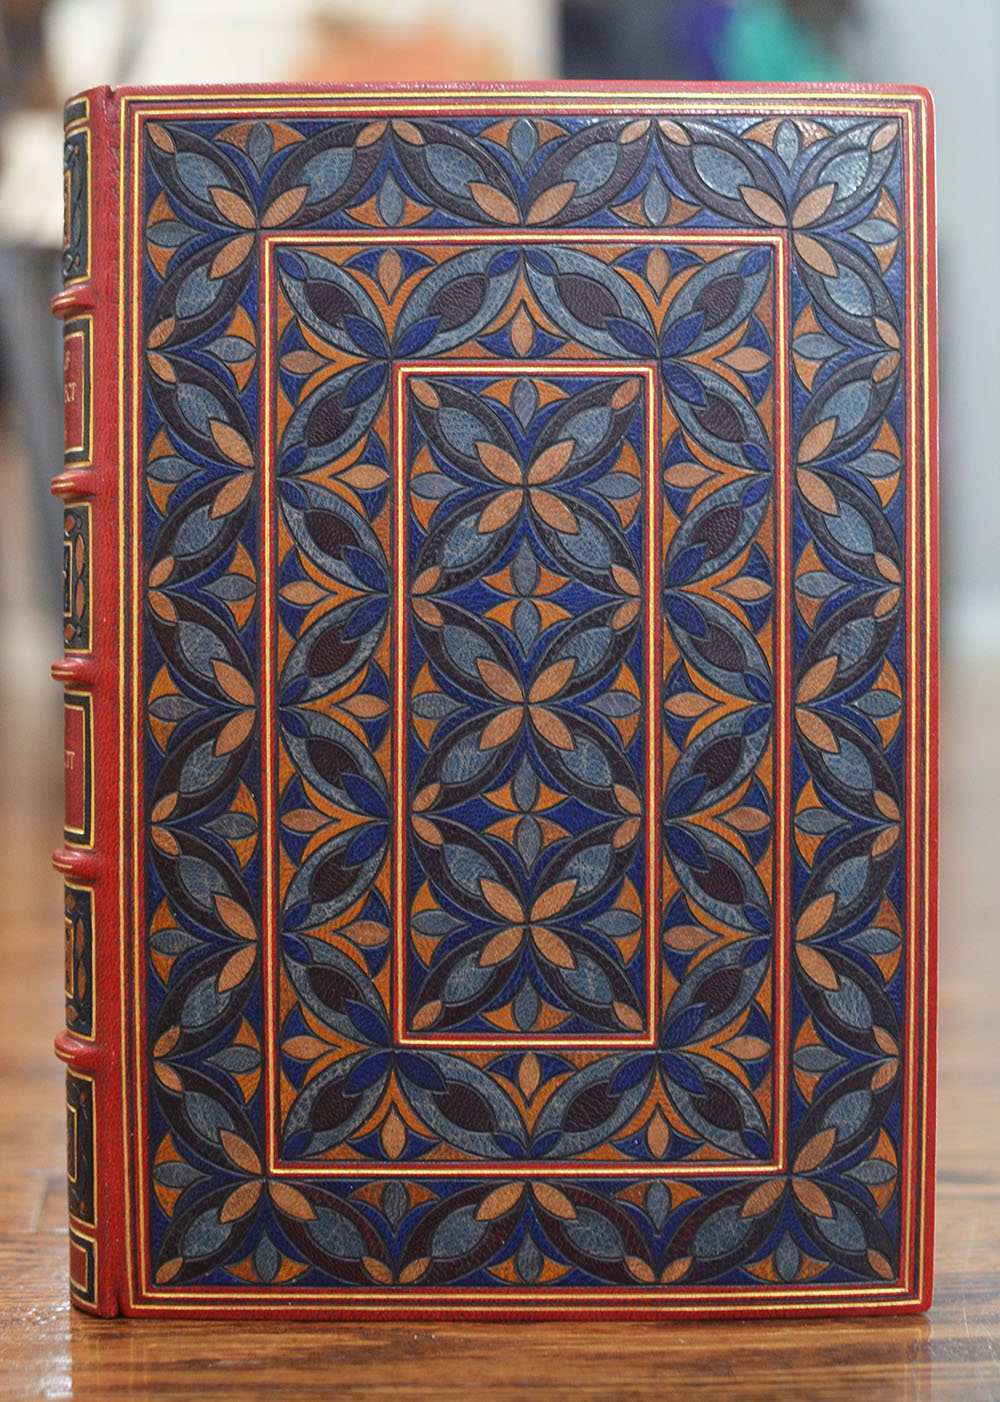 [A Mosaic Binding by Curtis Walters] In Quest of the Perfect Book